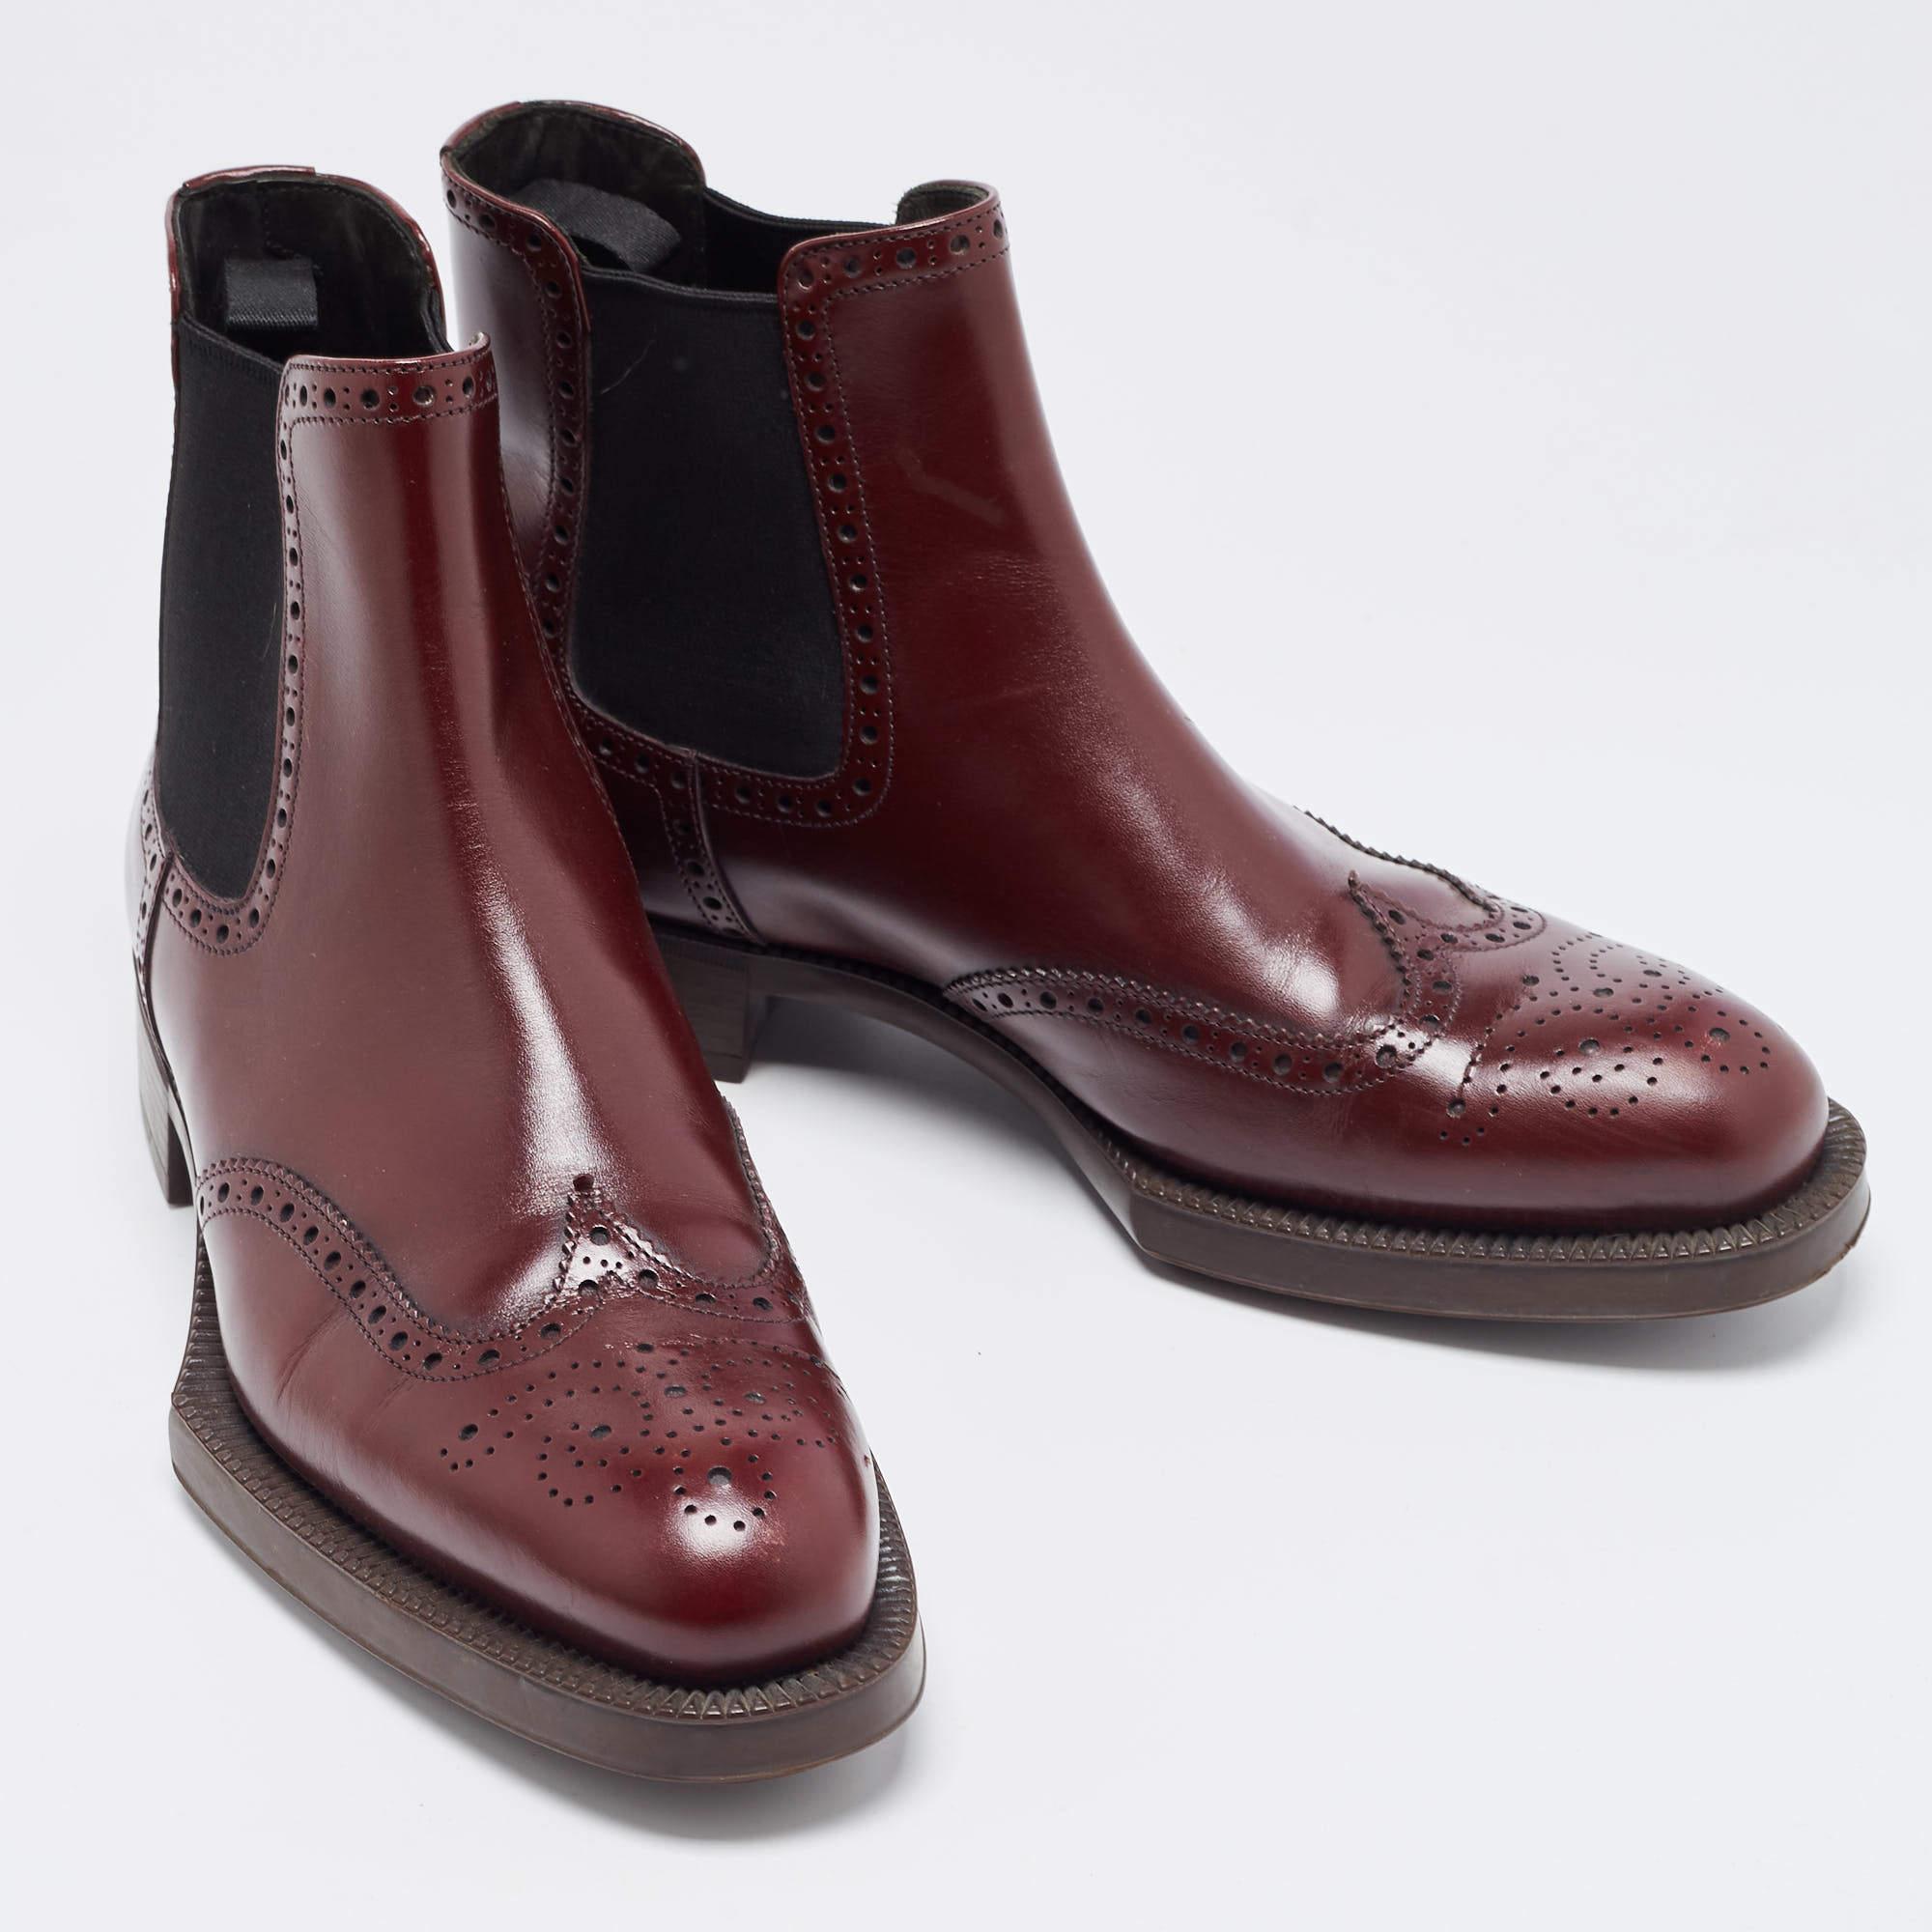 Prada Burgundy Leather Brogue Ankle Boots Size 38.5 1